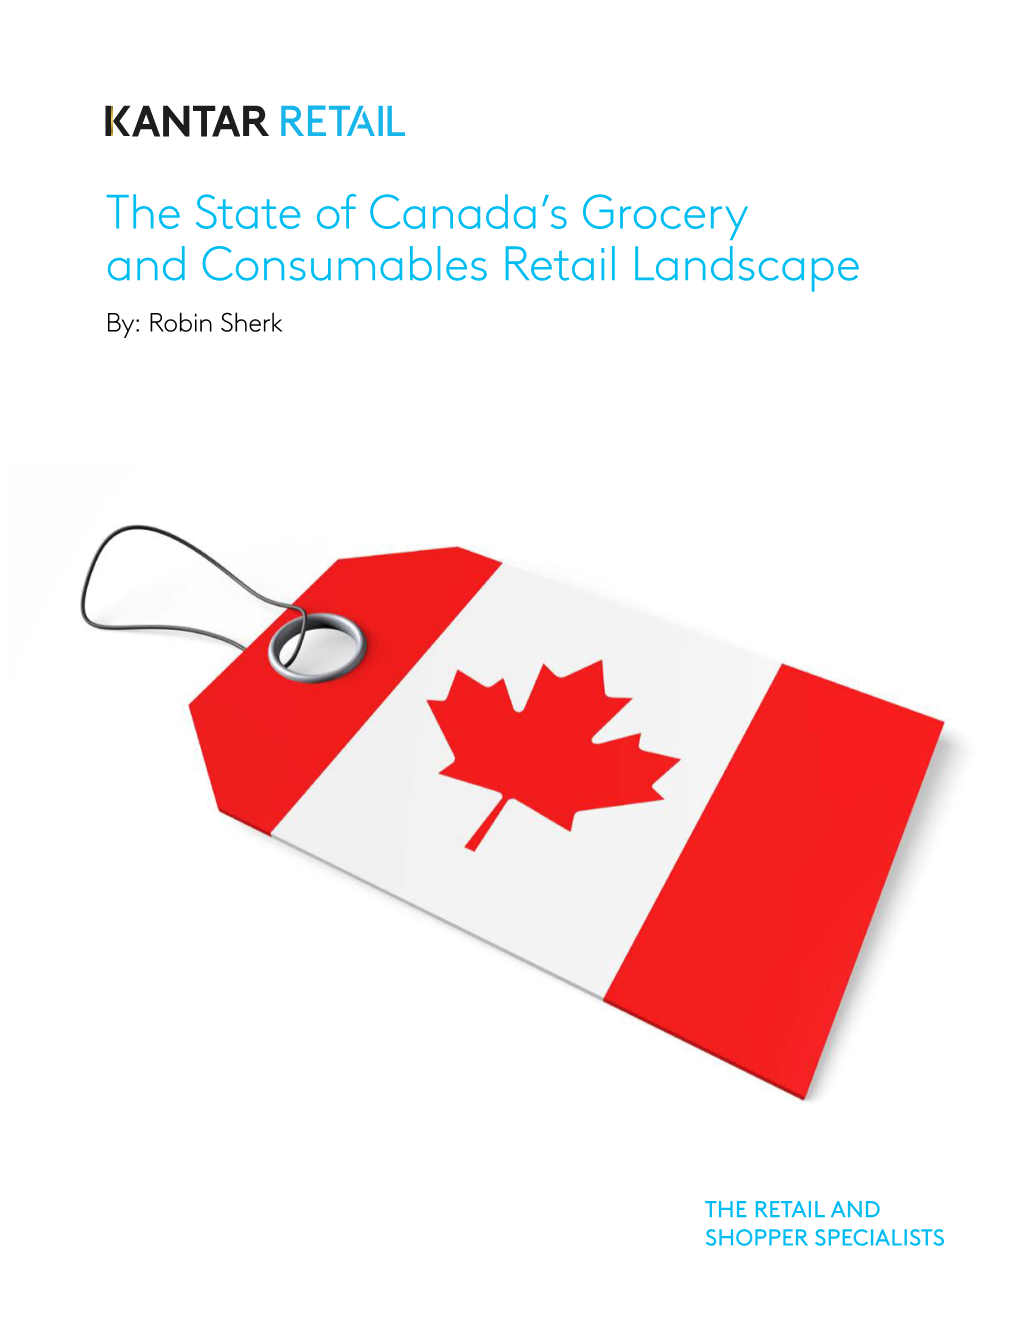 The State of Canada's Grocery and Consumables Retail Landscape